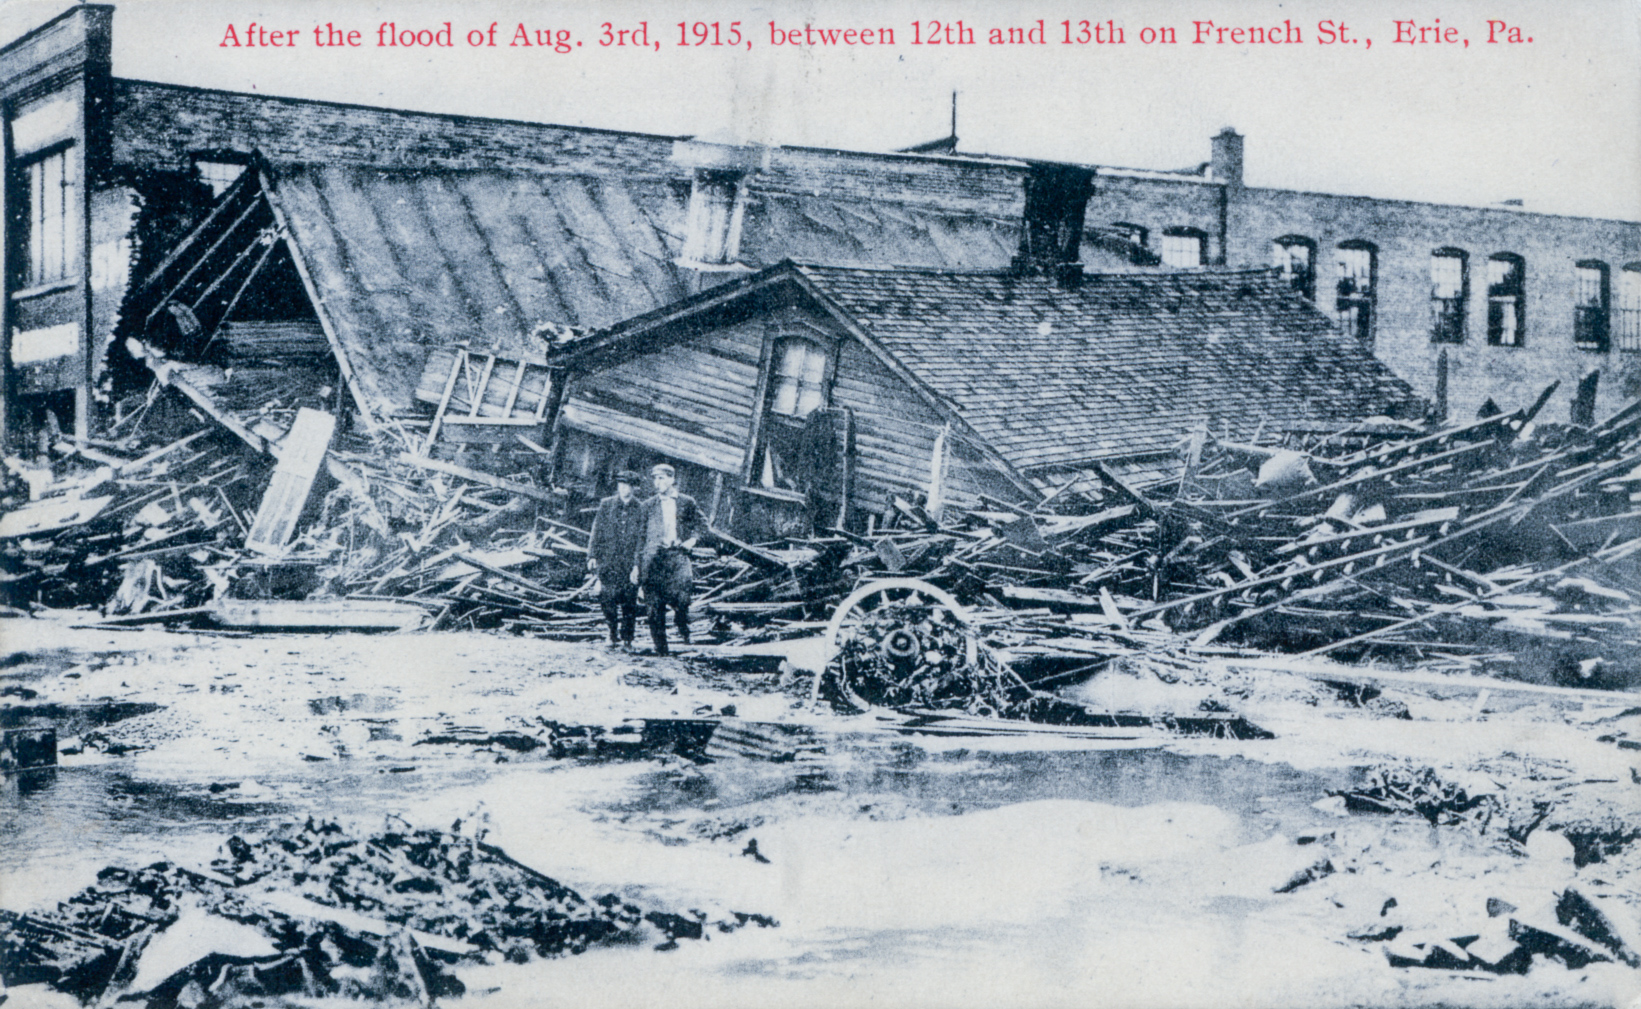 After the flood of Aug 3rd 1915, between 12th and 13th on French St, Erie PA